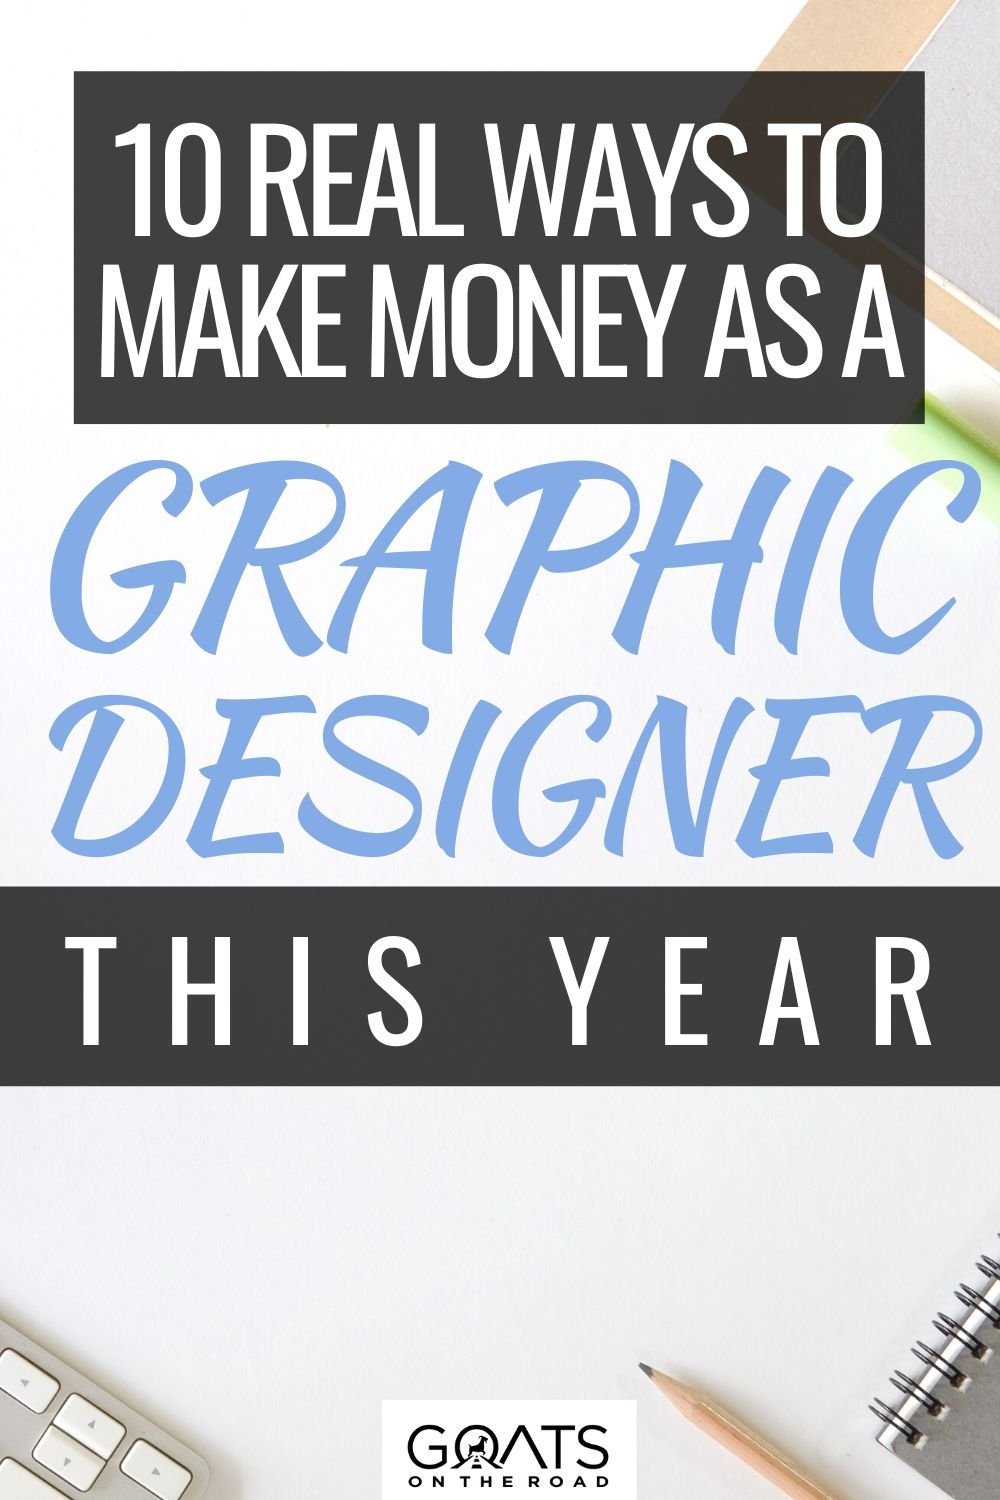 10 Real Ways To Make Money As a Graphic Designer